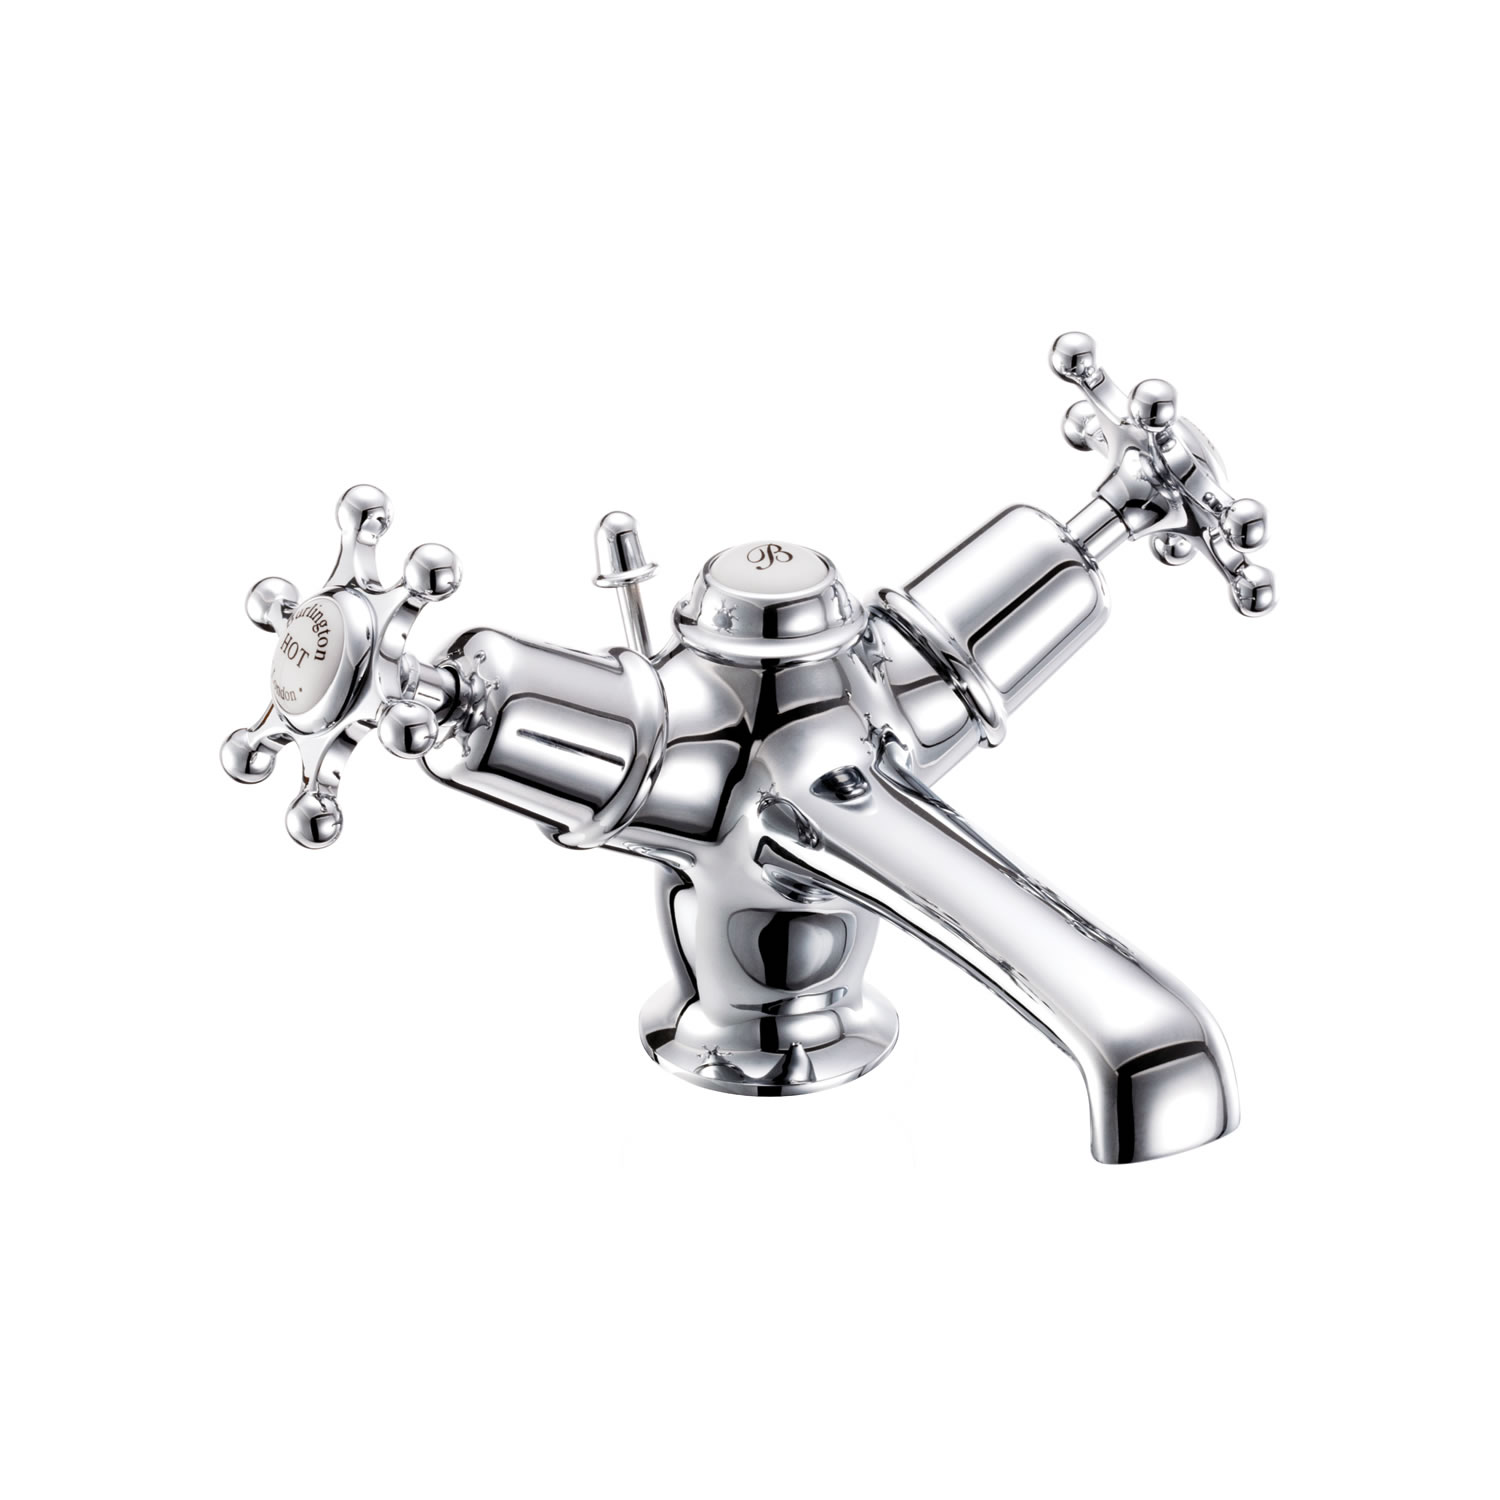 Birkenhead basin mixer with low central indice with pop-up waste